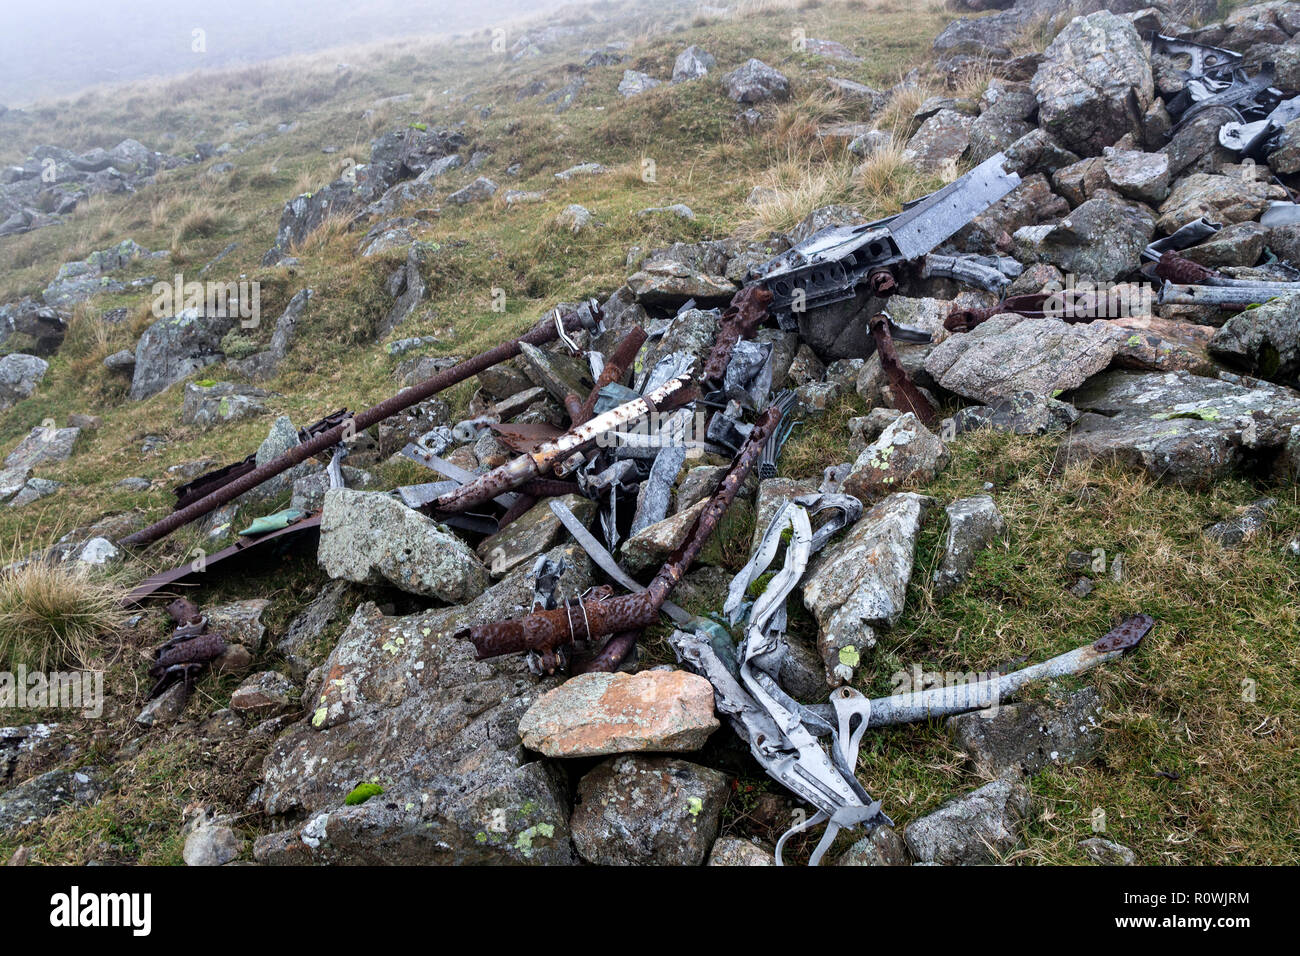 Wreckage from a Hurricane Aircraft Which Crashed on the Mountain of Slight Side Near Sca Fell on 12th August 1941, Lake District, Cumbria, UK Stock Photo